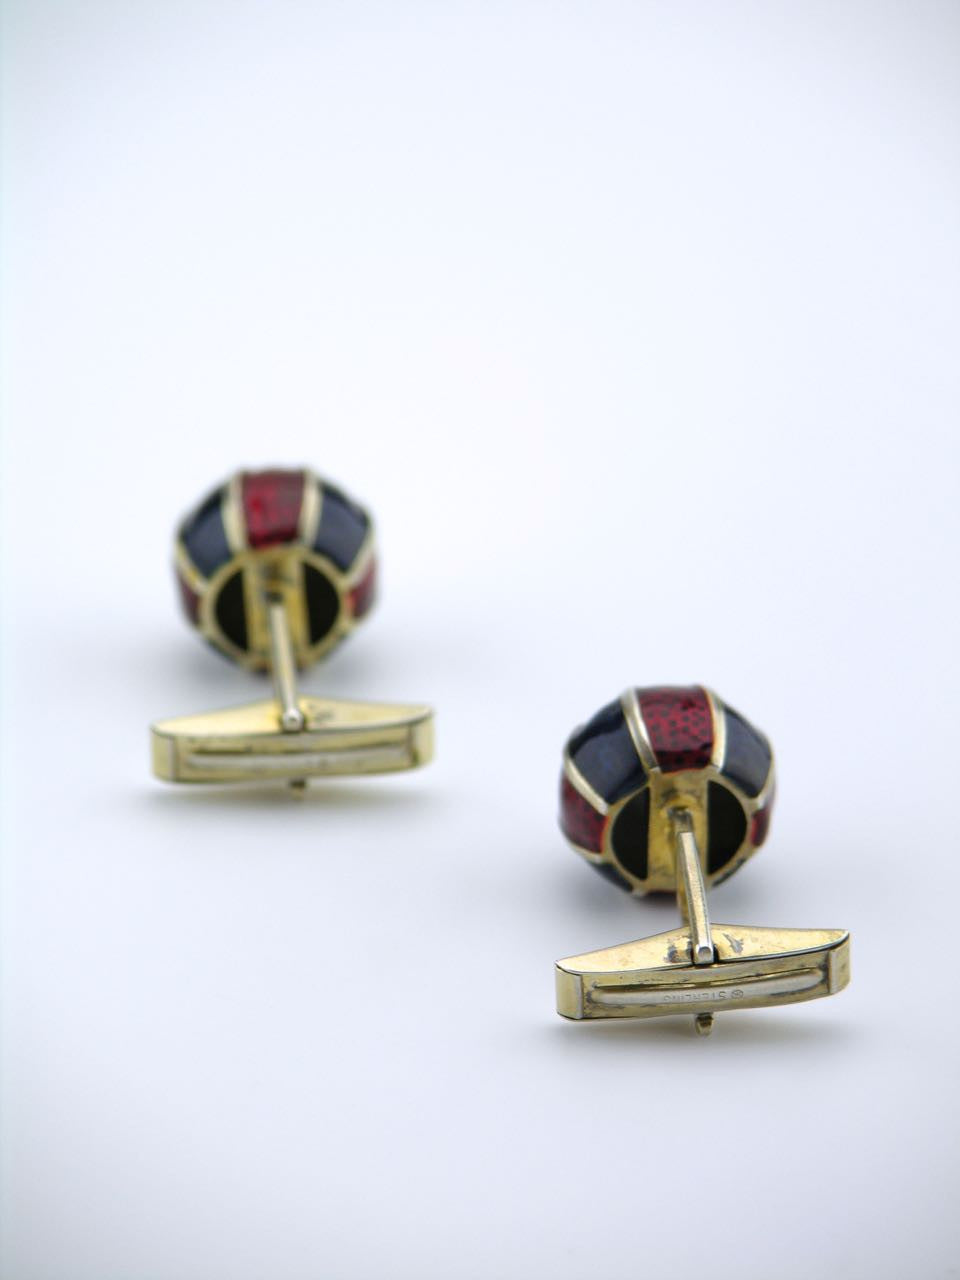 Vintage American Solid Silver Red and Blue Enamel Gilt Ball Cufflinks